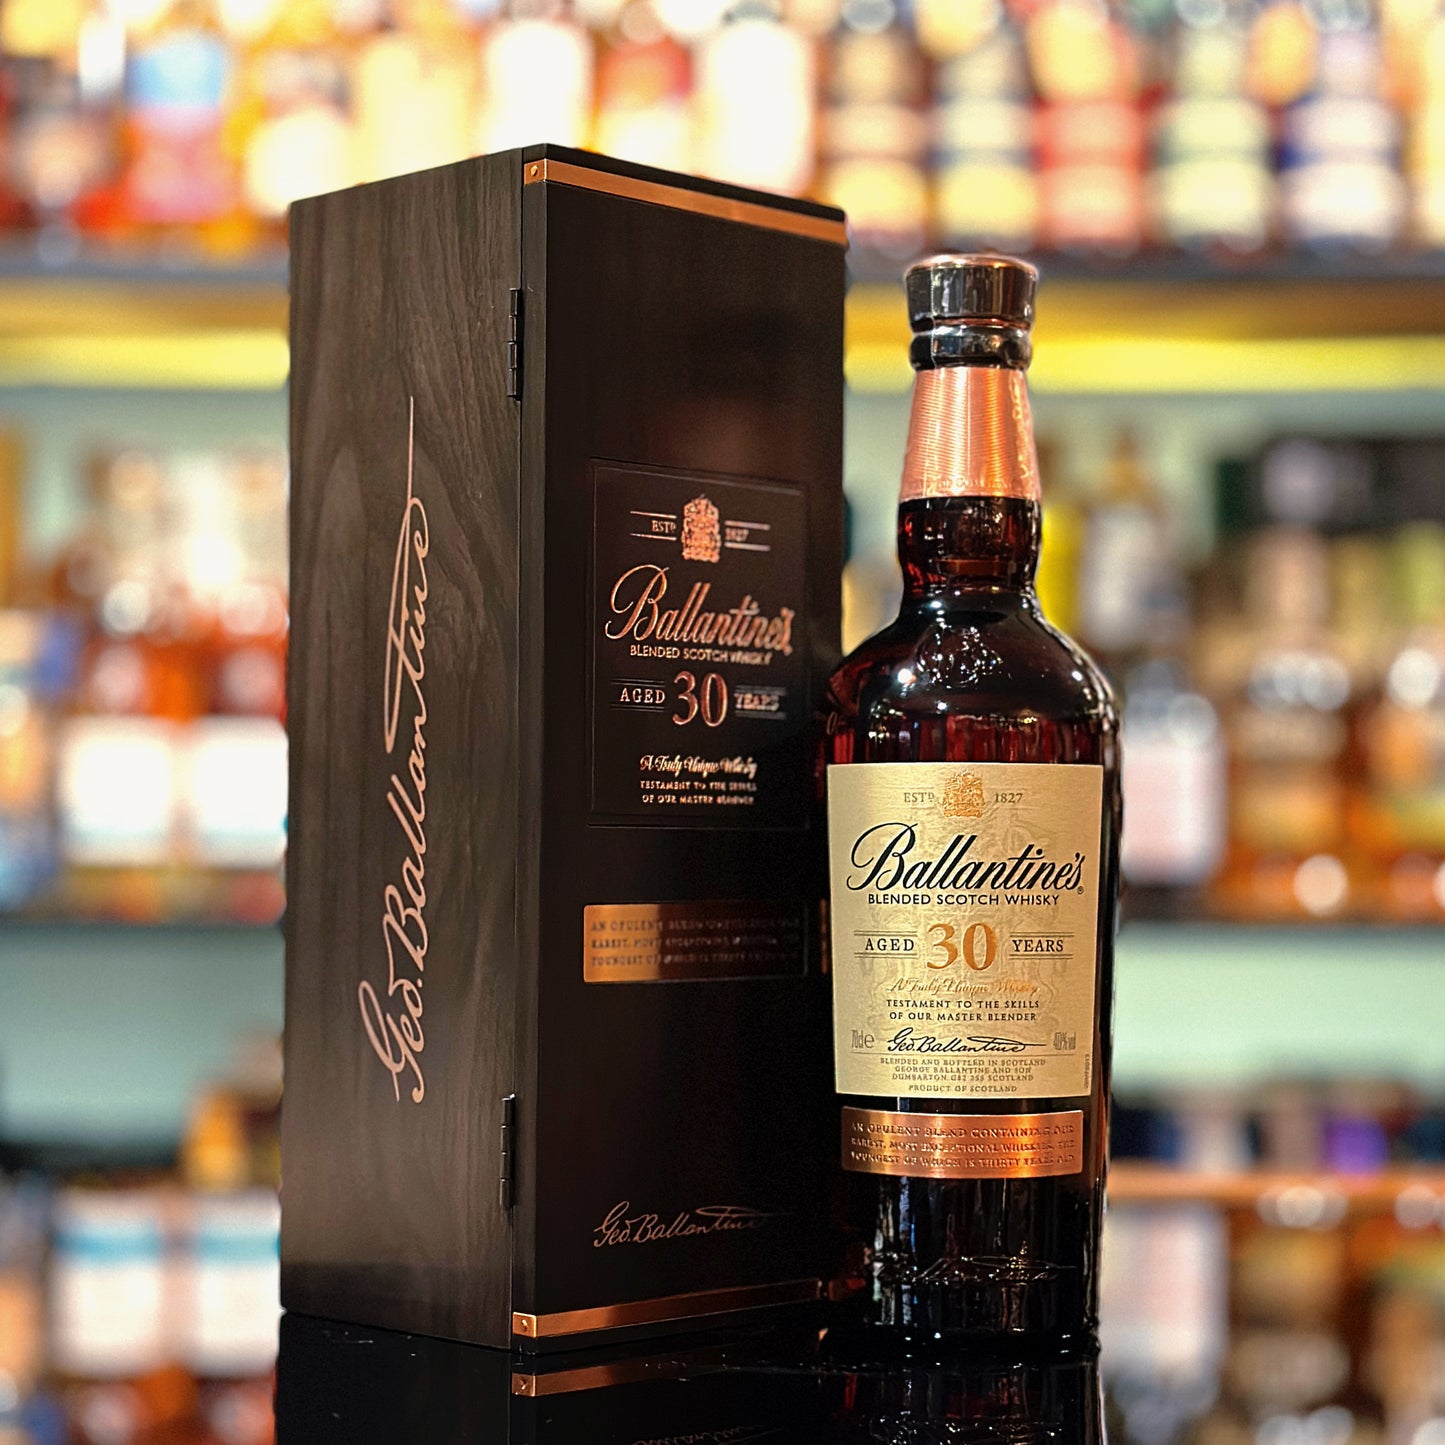 Ballantine’s 30 Year Old Blended Scotch Whisky